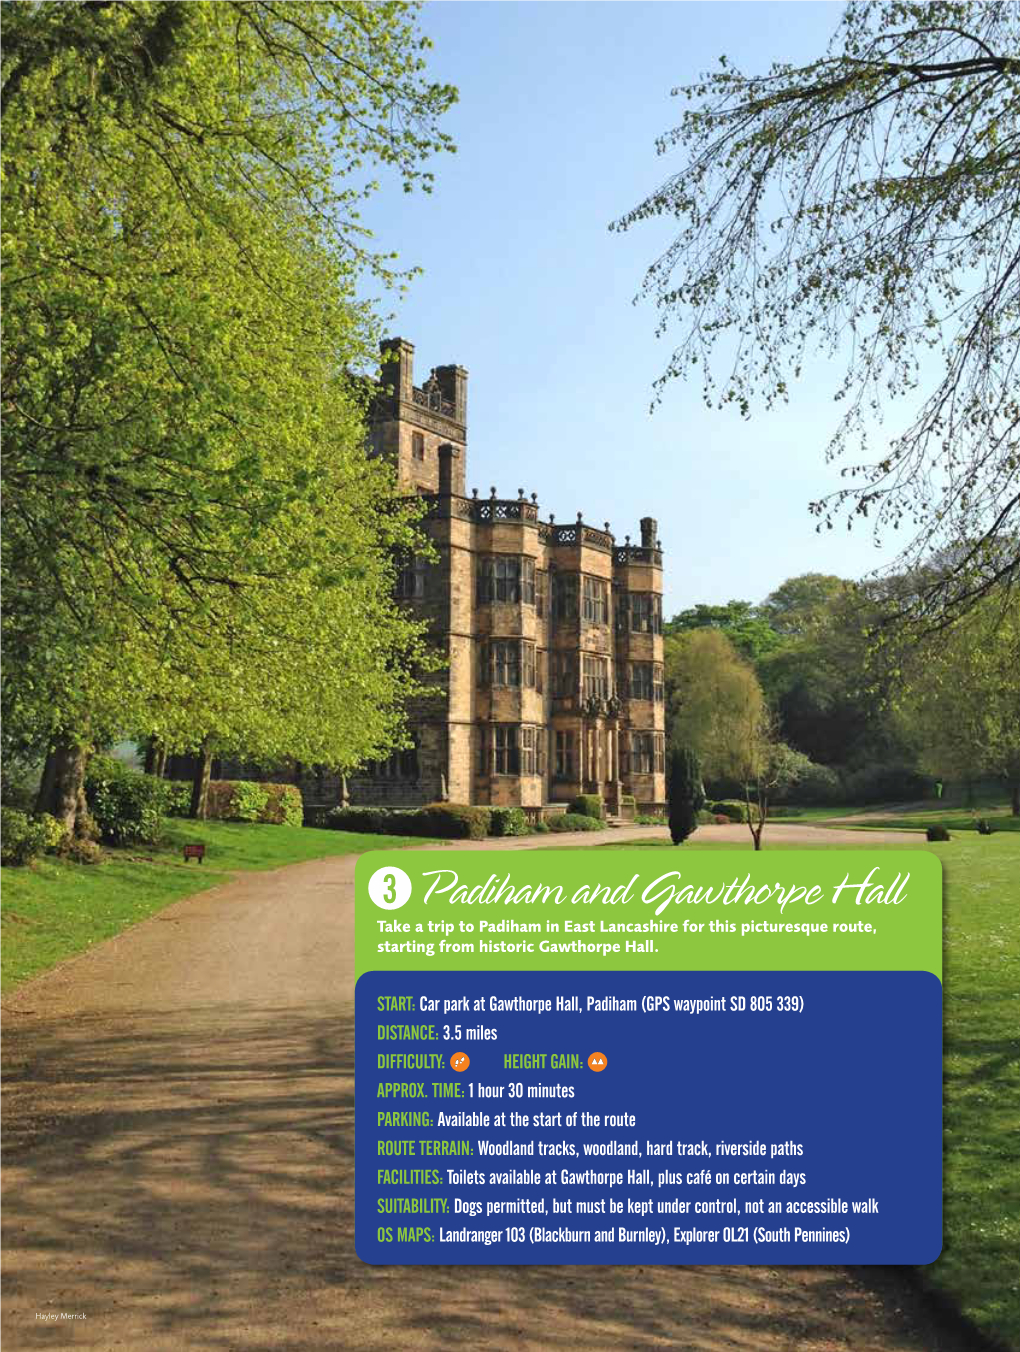 Padiham and Gawthorpe Hall Take a Trip to Padiham in East Lancashire for This Picturesque Route, Starting from Historic Gawthorpe Hall